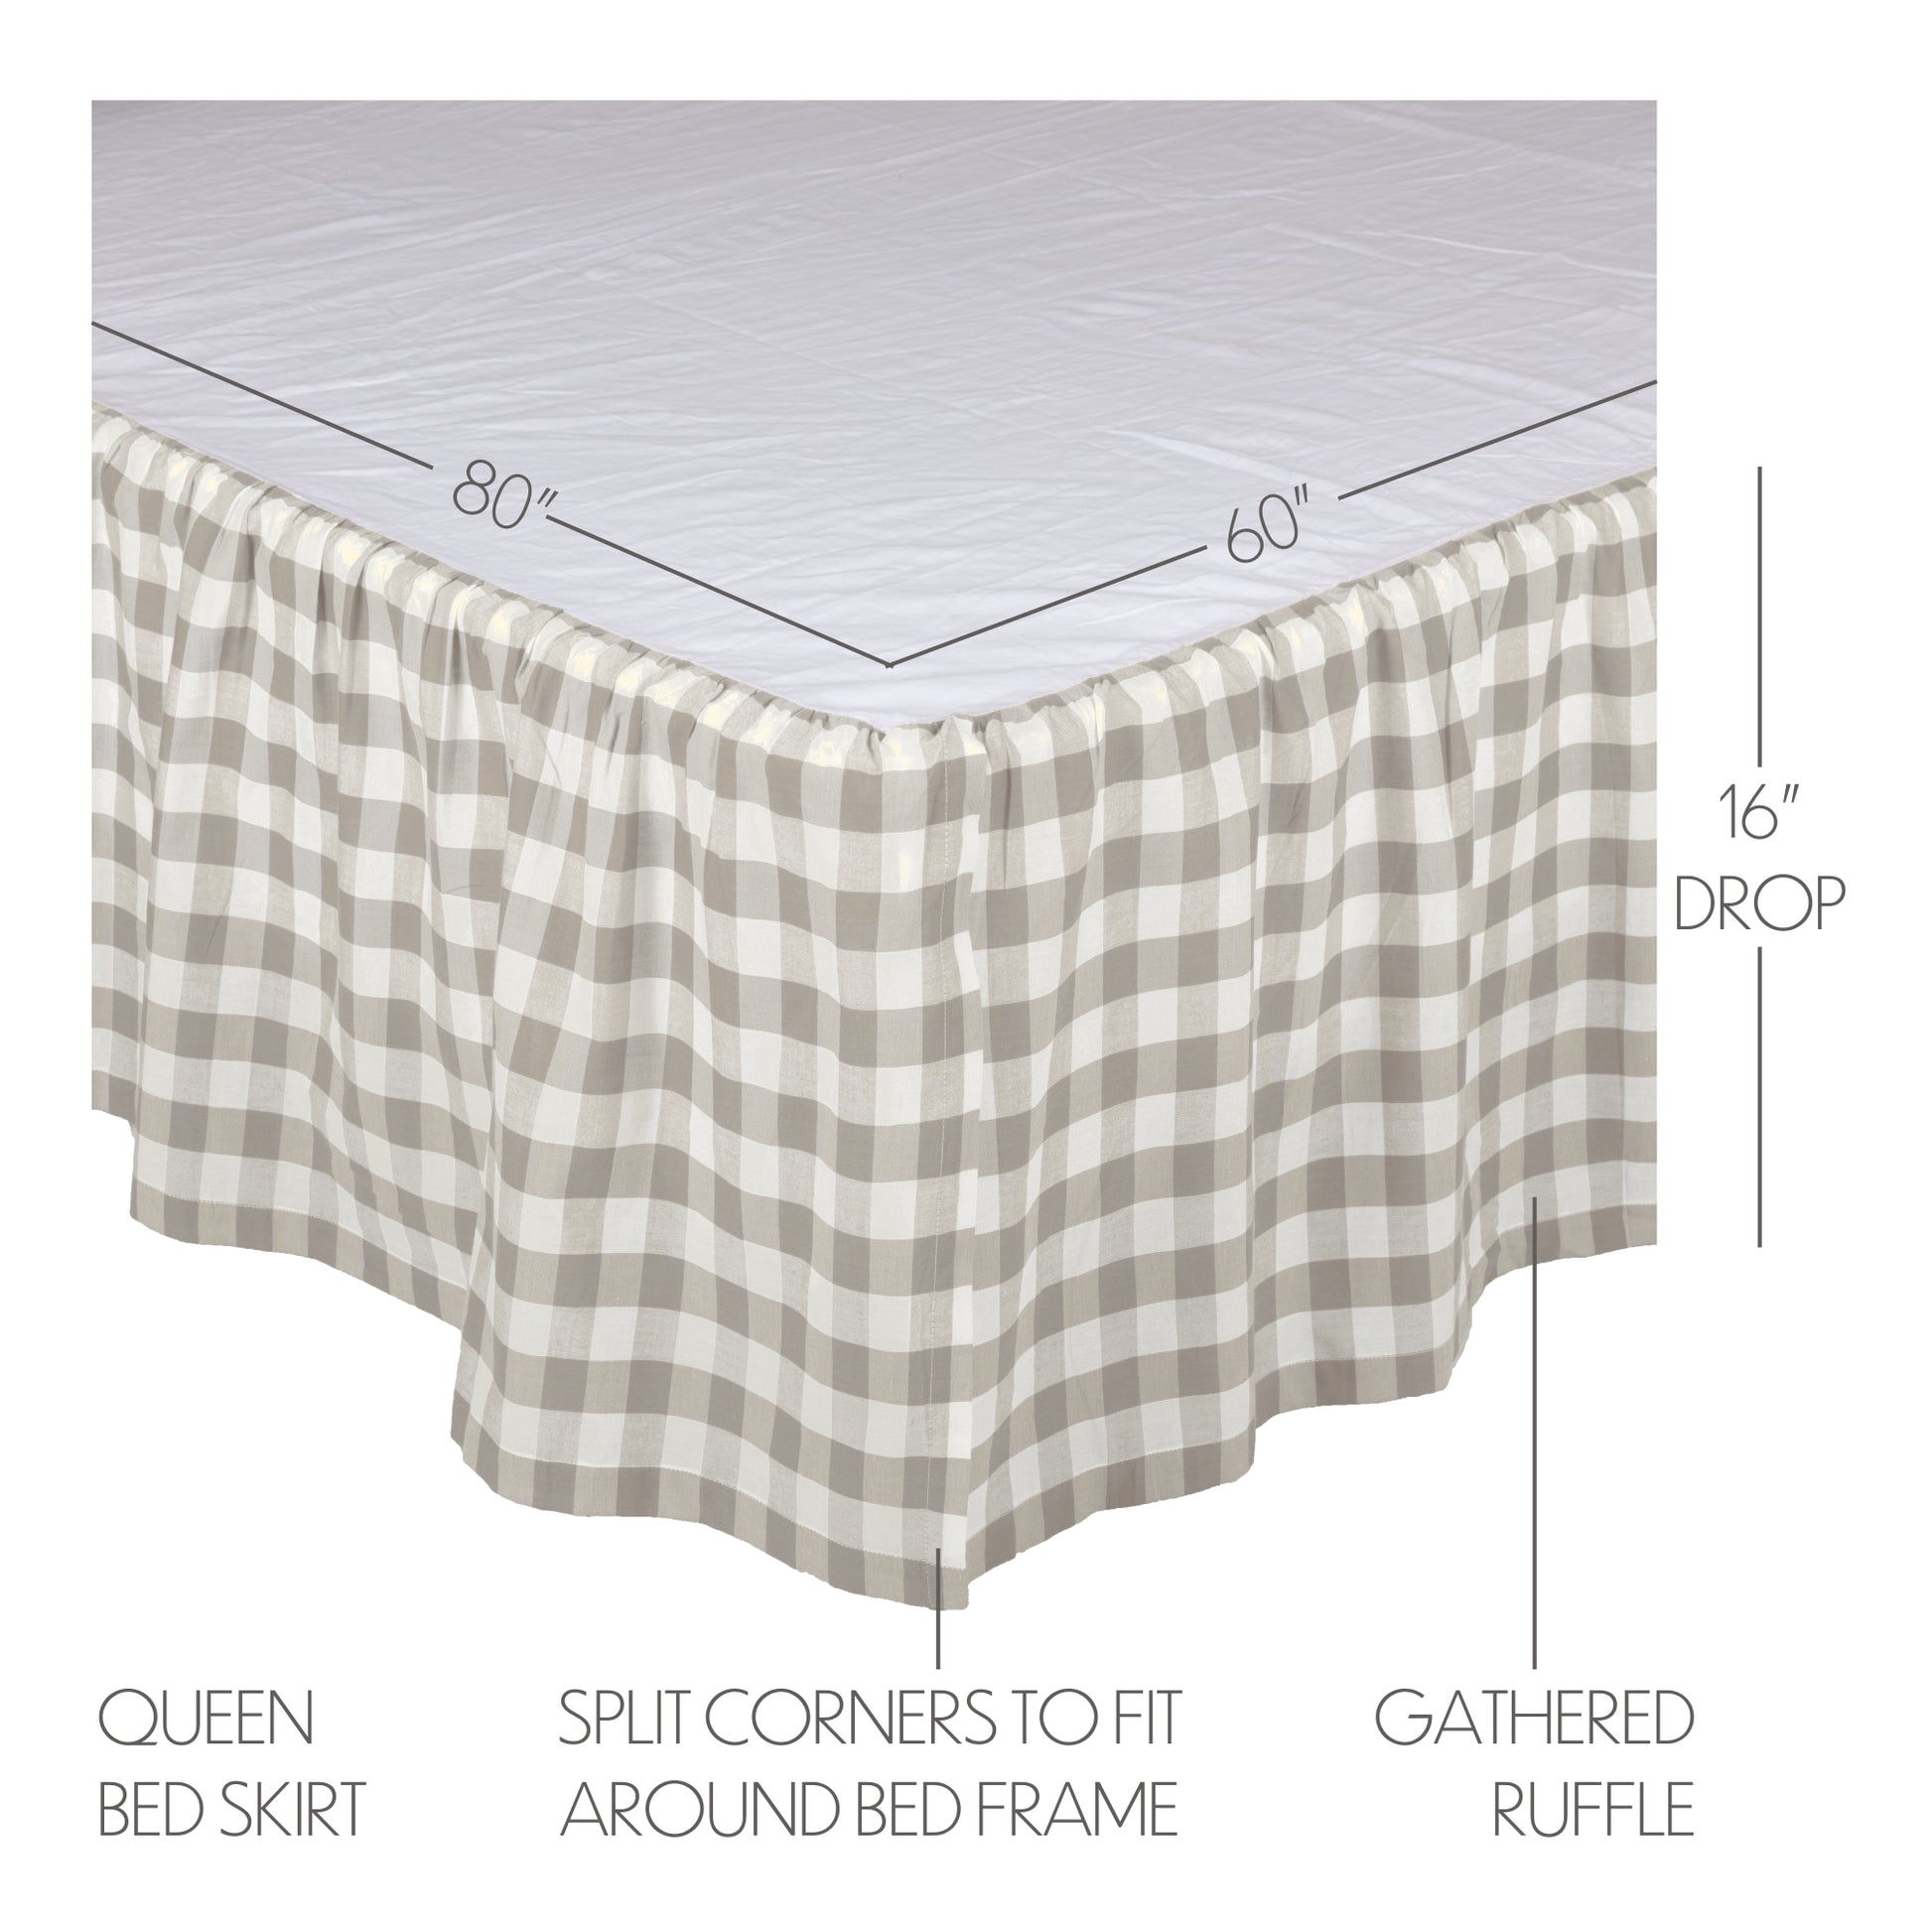 40410-Annie-Buffalo-Grey-Check-Queen-Bed-Skirt-60x80x16-image-2